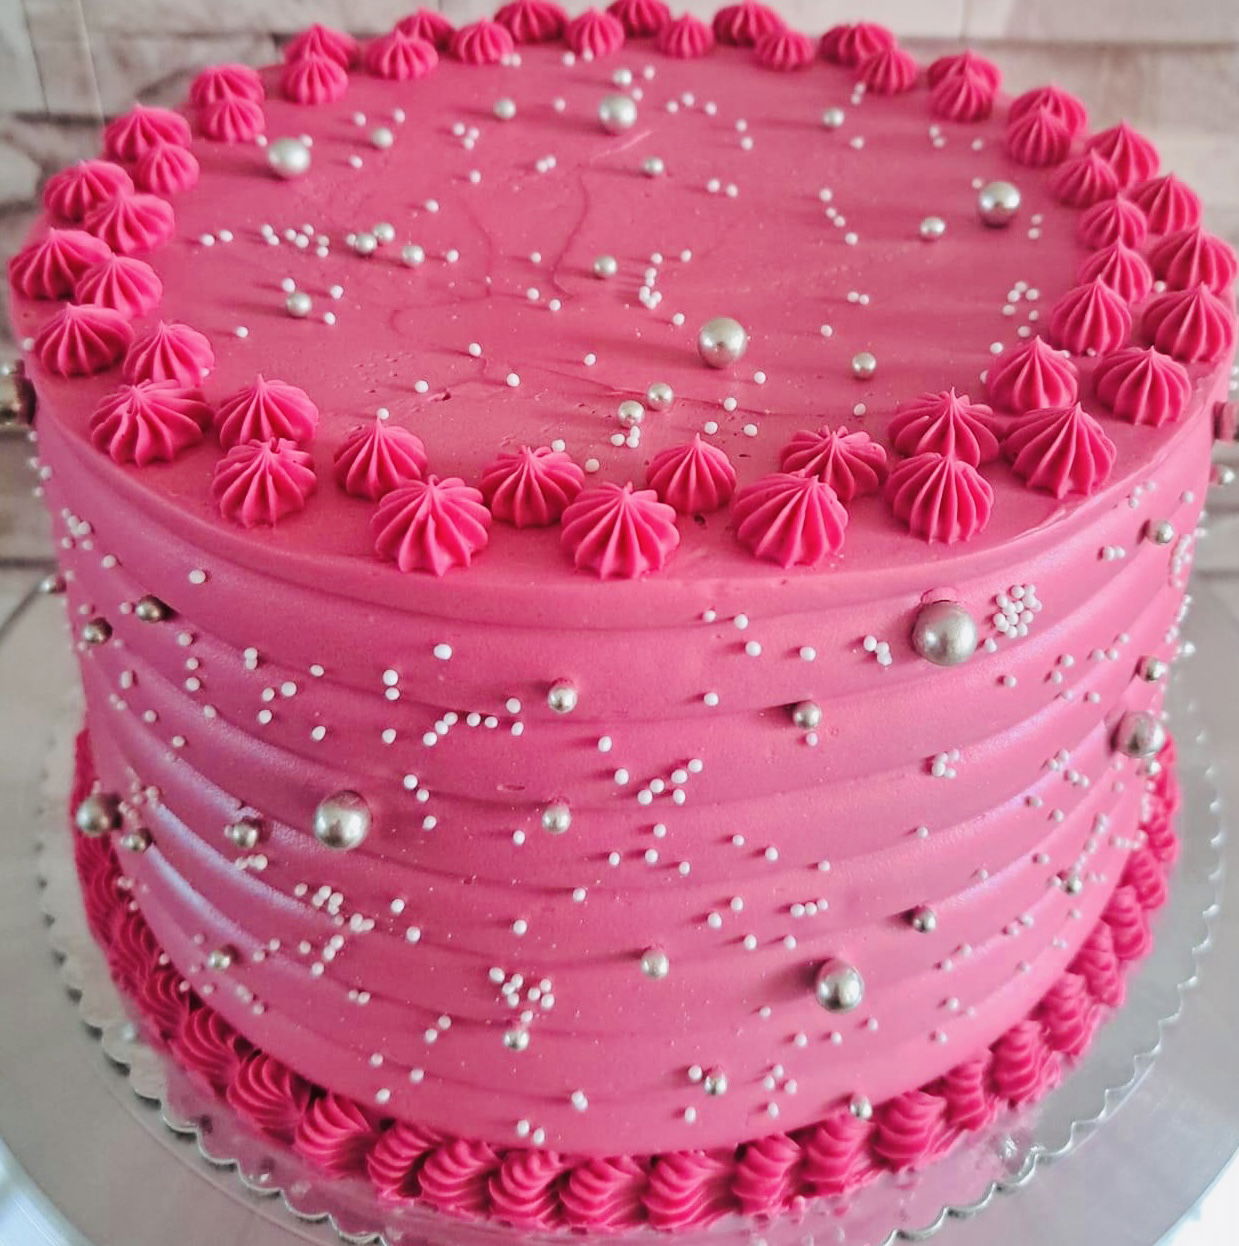 2 Layer Strawberry Cake with Buttercream Frosting